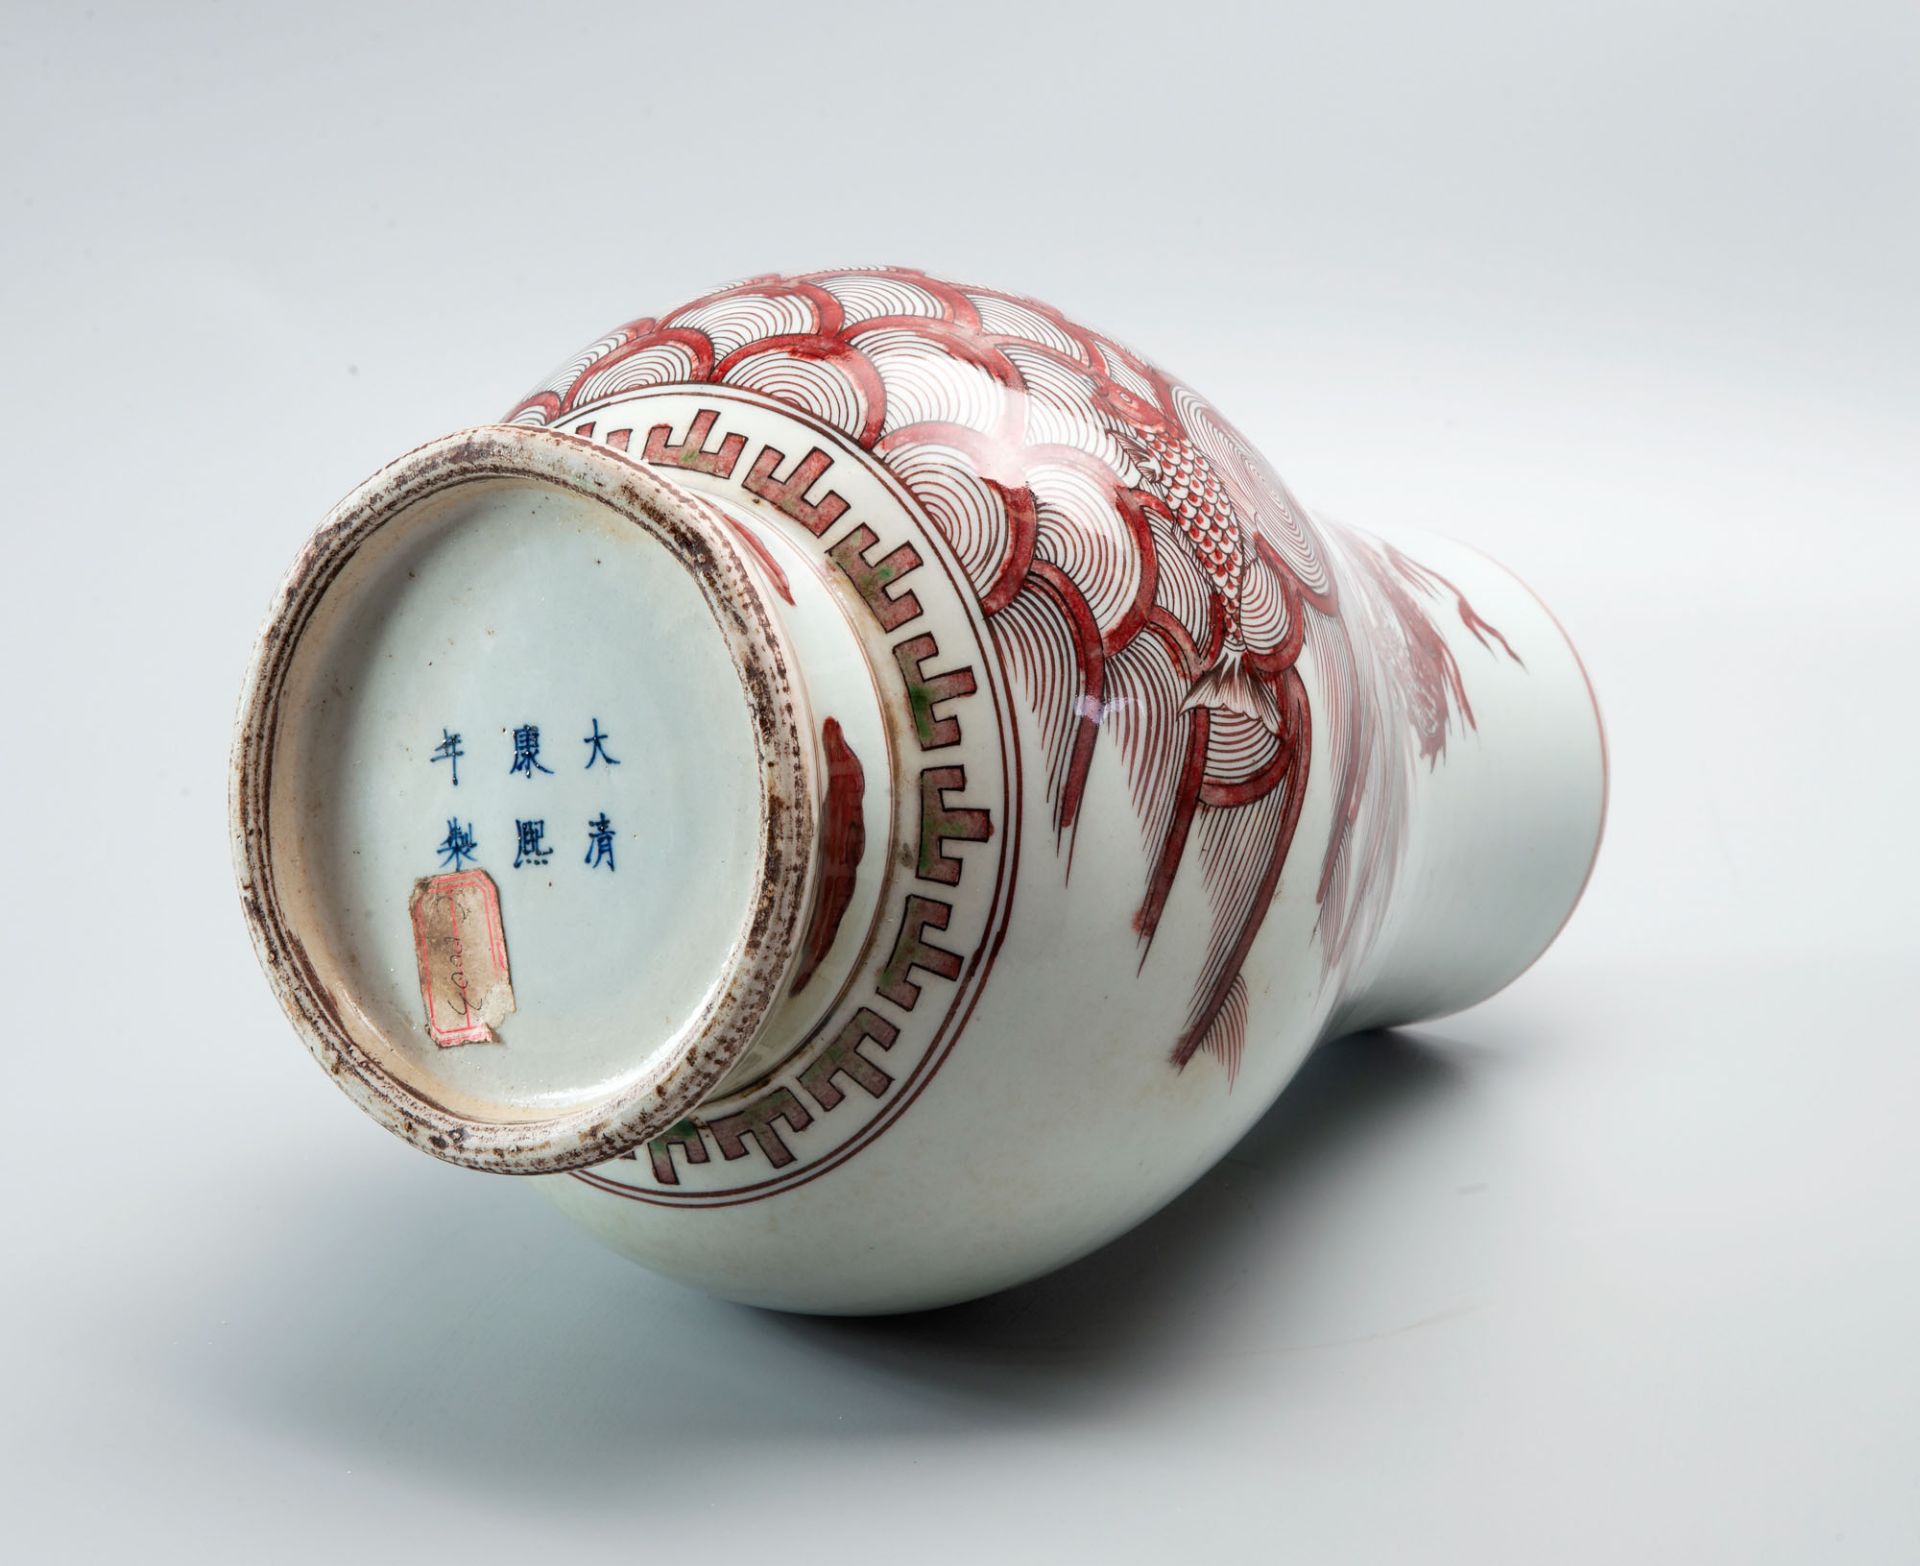 A Fine White and Copper Red Chinese Porcelain Vase, China, Qing Dynasty Kangxi mark - Image 3 of 4